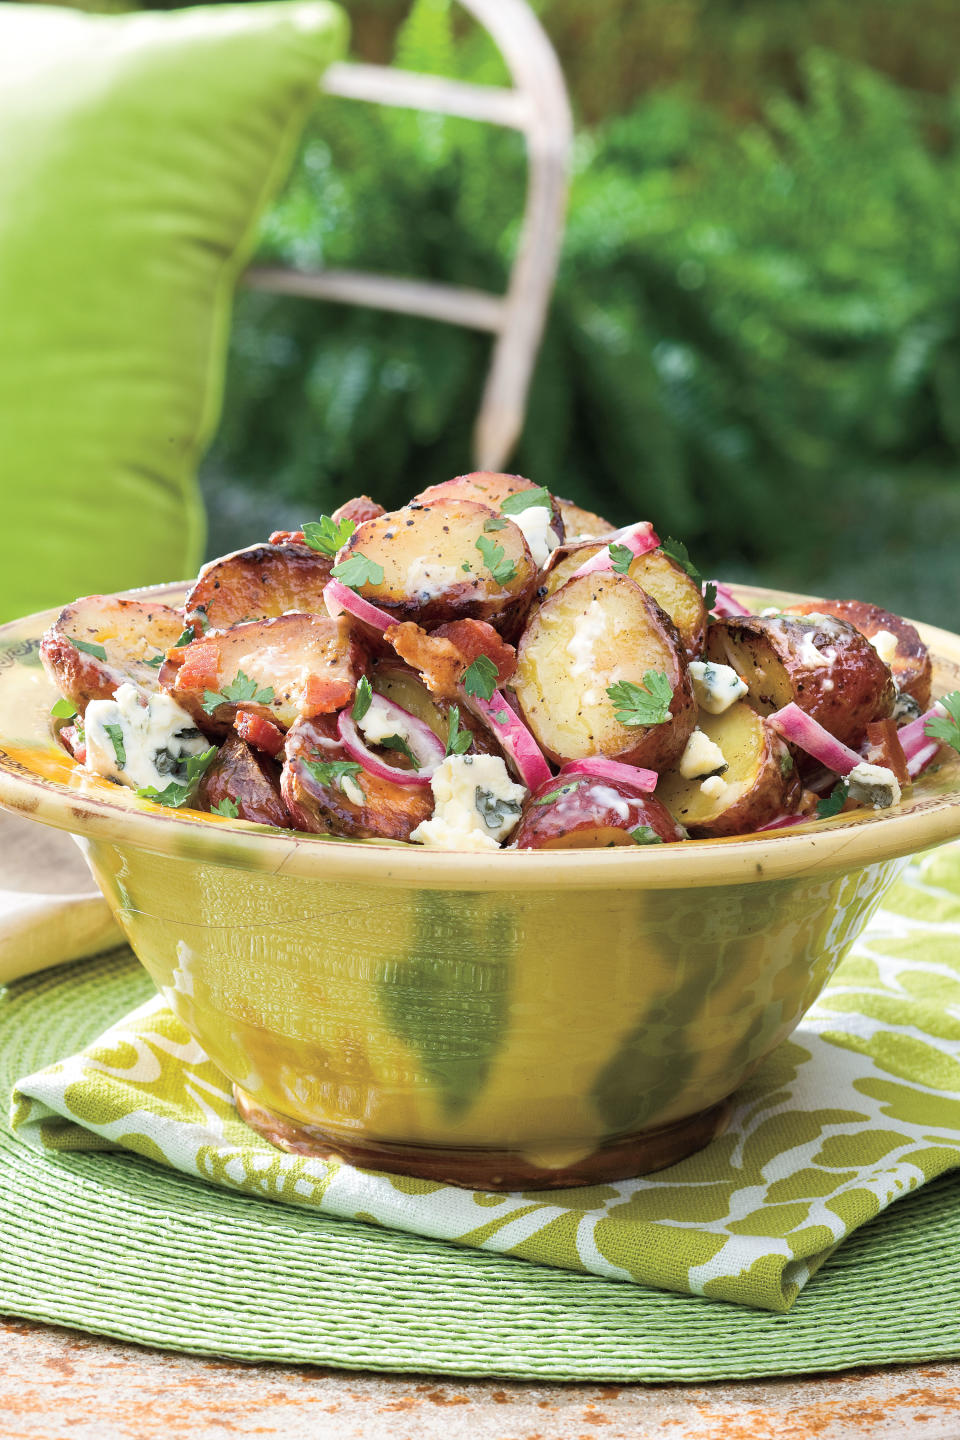 Big Daddy’s Grilled Blue Cheese-and-Bacon Potato Salad